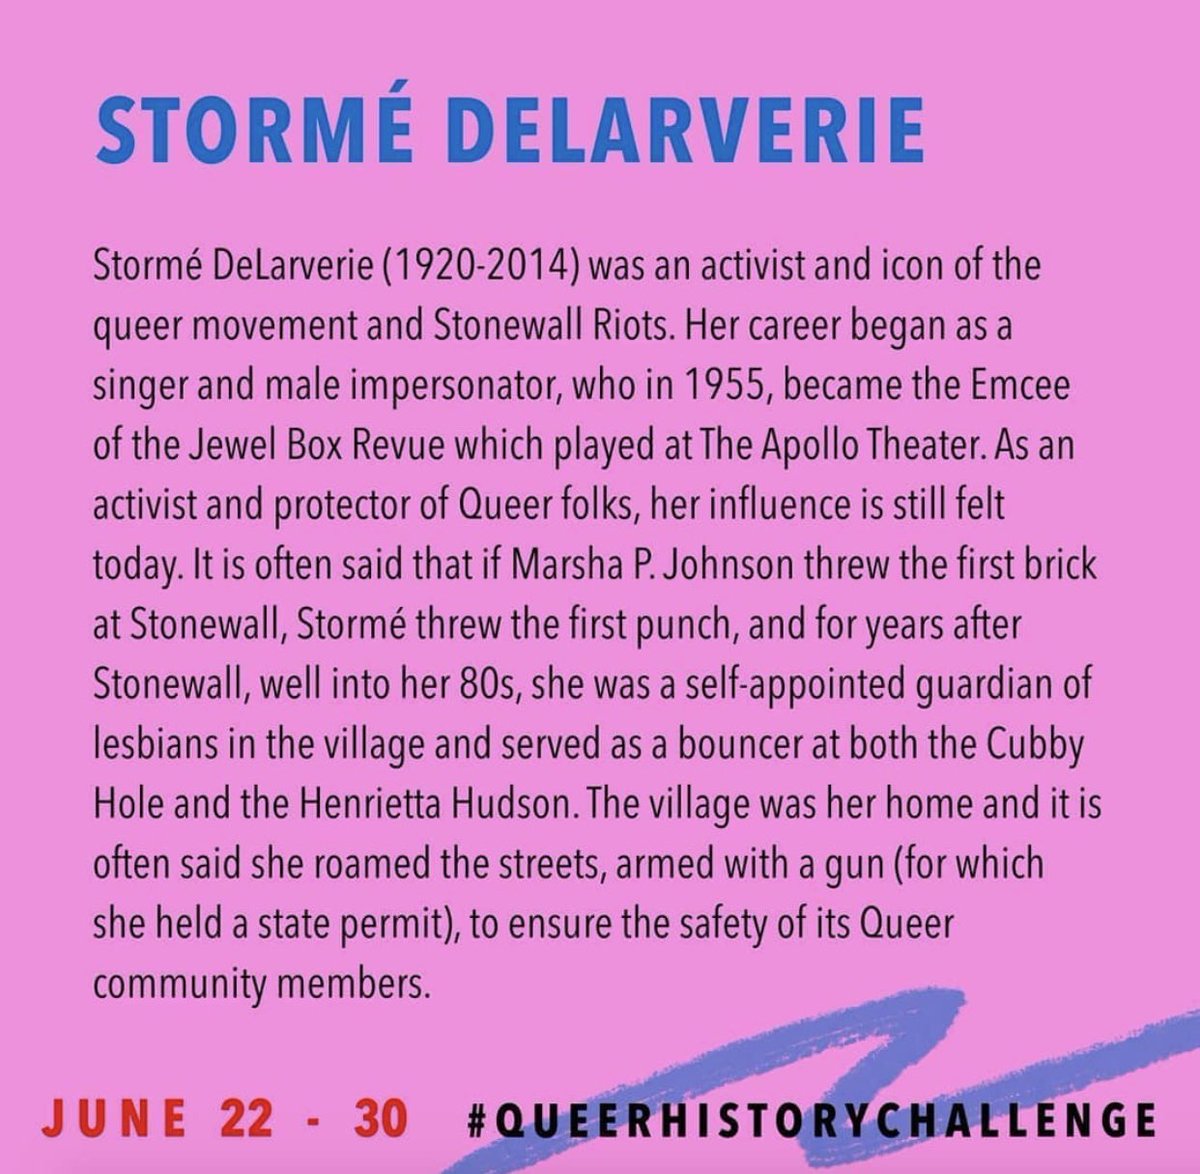 UPDATE: @dleatherdyke brought it to my attention that I failed to mention Storme Delarverie was a butch Lesbian & a person of color. I felt I should update this post as I believe representation matters. This whole series is to highlight lgbtq+ POC ✊🏾Happy Pride! #stormedelarverie